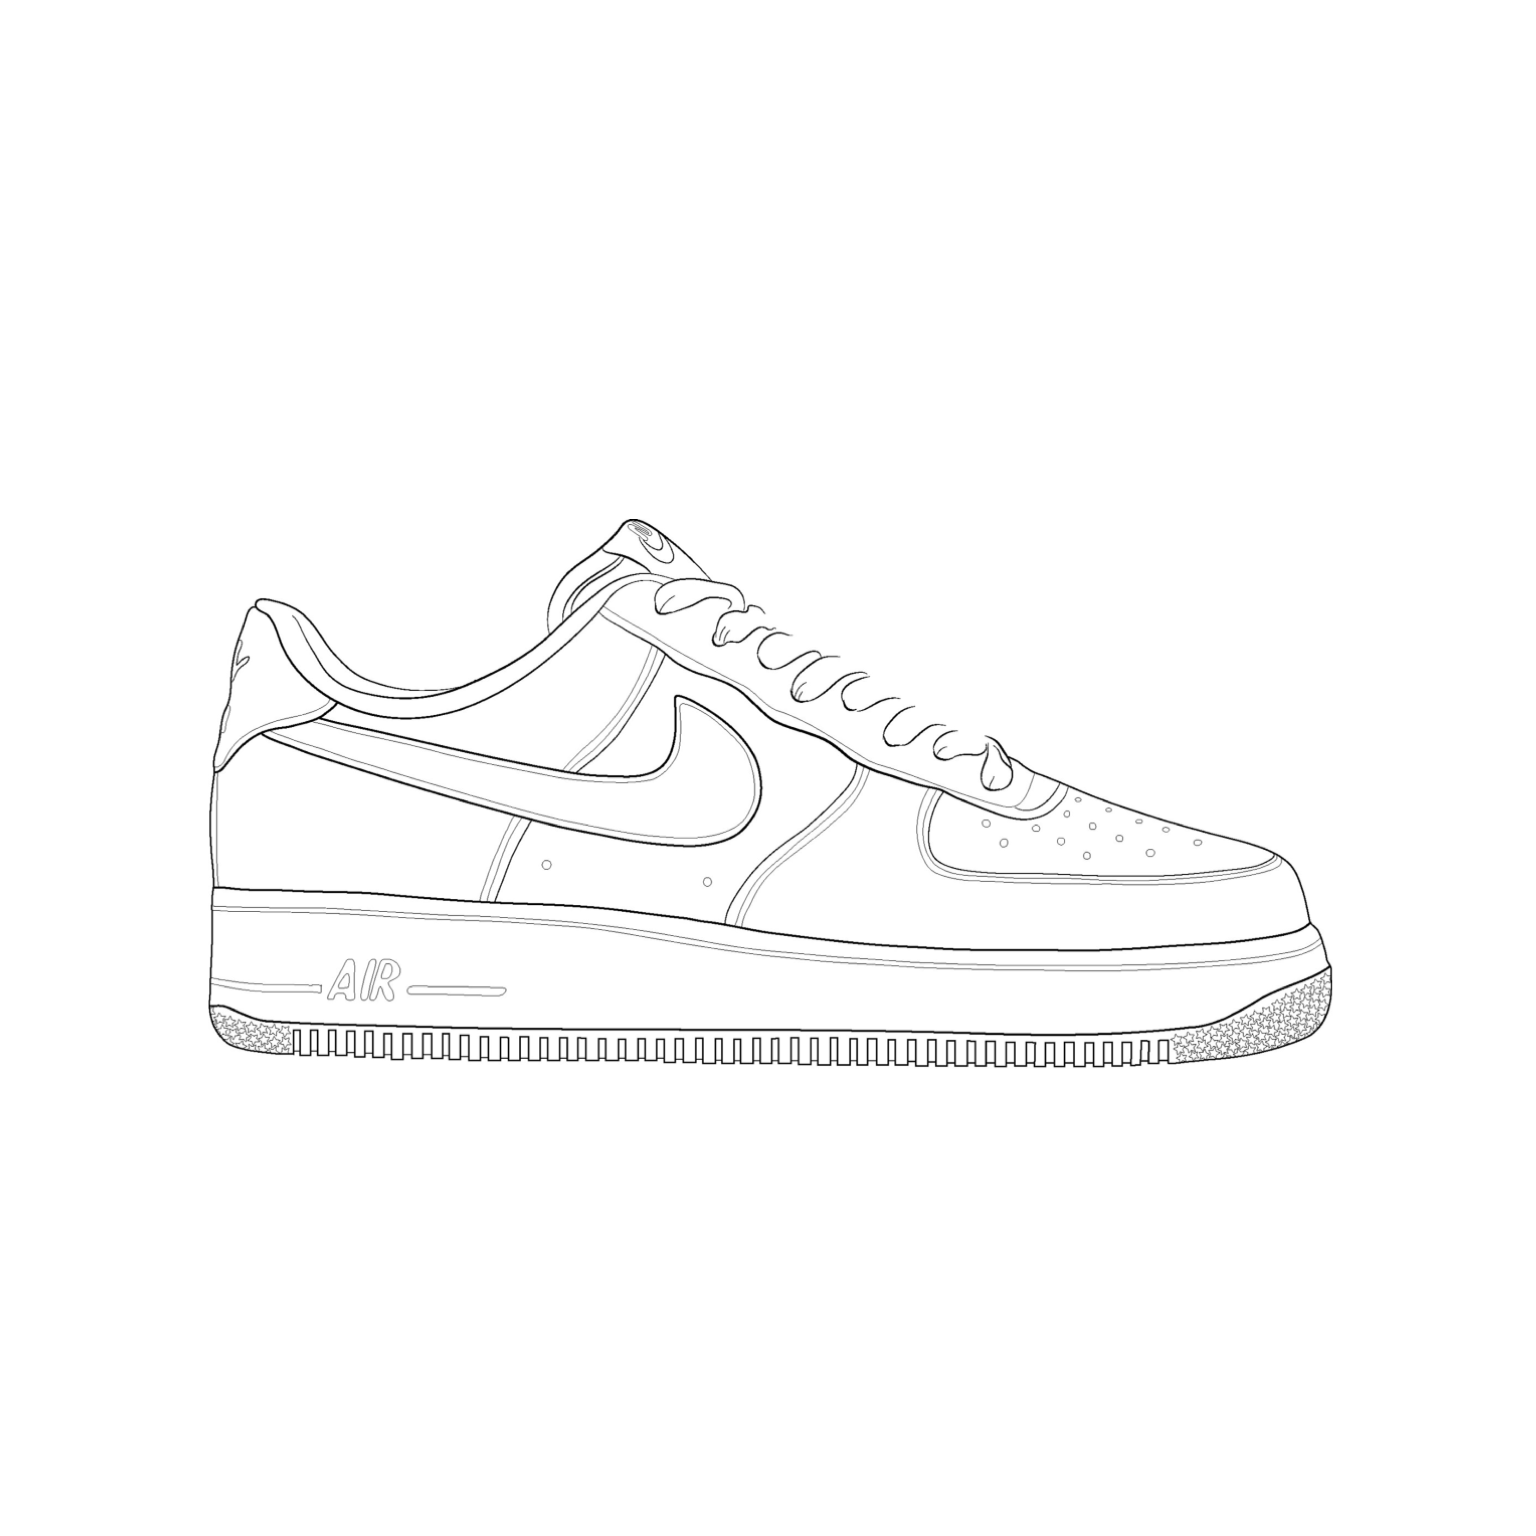 air force one drawing